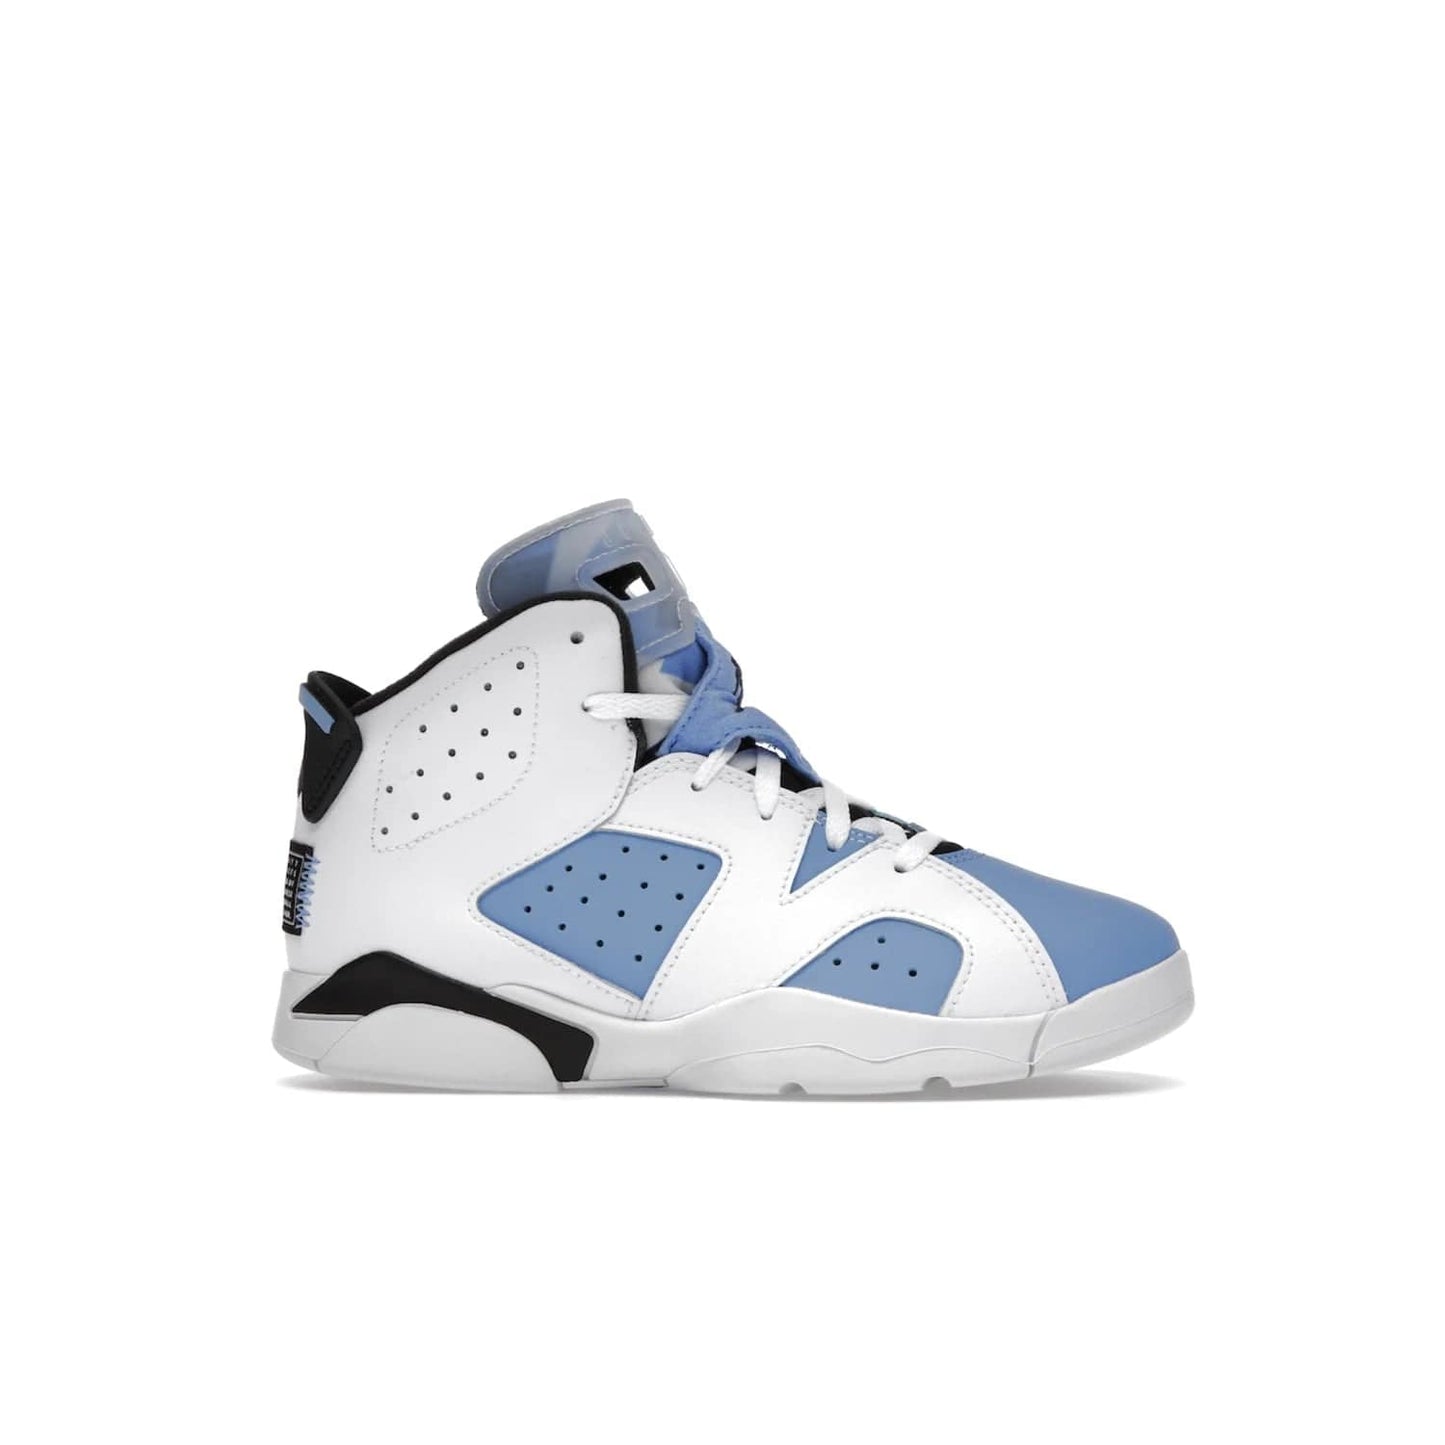 Jordan 6 Retro UNC White (PS) - Image 2 - Only at www.BallersClubKickz.com - The Air Jordan 6 Retro UNC White PS celebrates Michael Jordan's alma mater, the University of North Carolina. It features a classic color-blocking of the iconic Jordan 6 Carmine and a stitched Jordan Team patch. This must-have sneaker released on April 27th, 2022. Referencing the university colors, get this shoe for a stylish and timeless style with university pride.